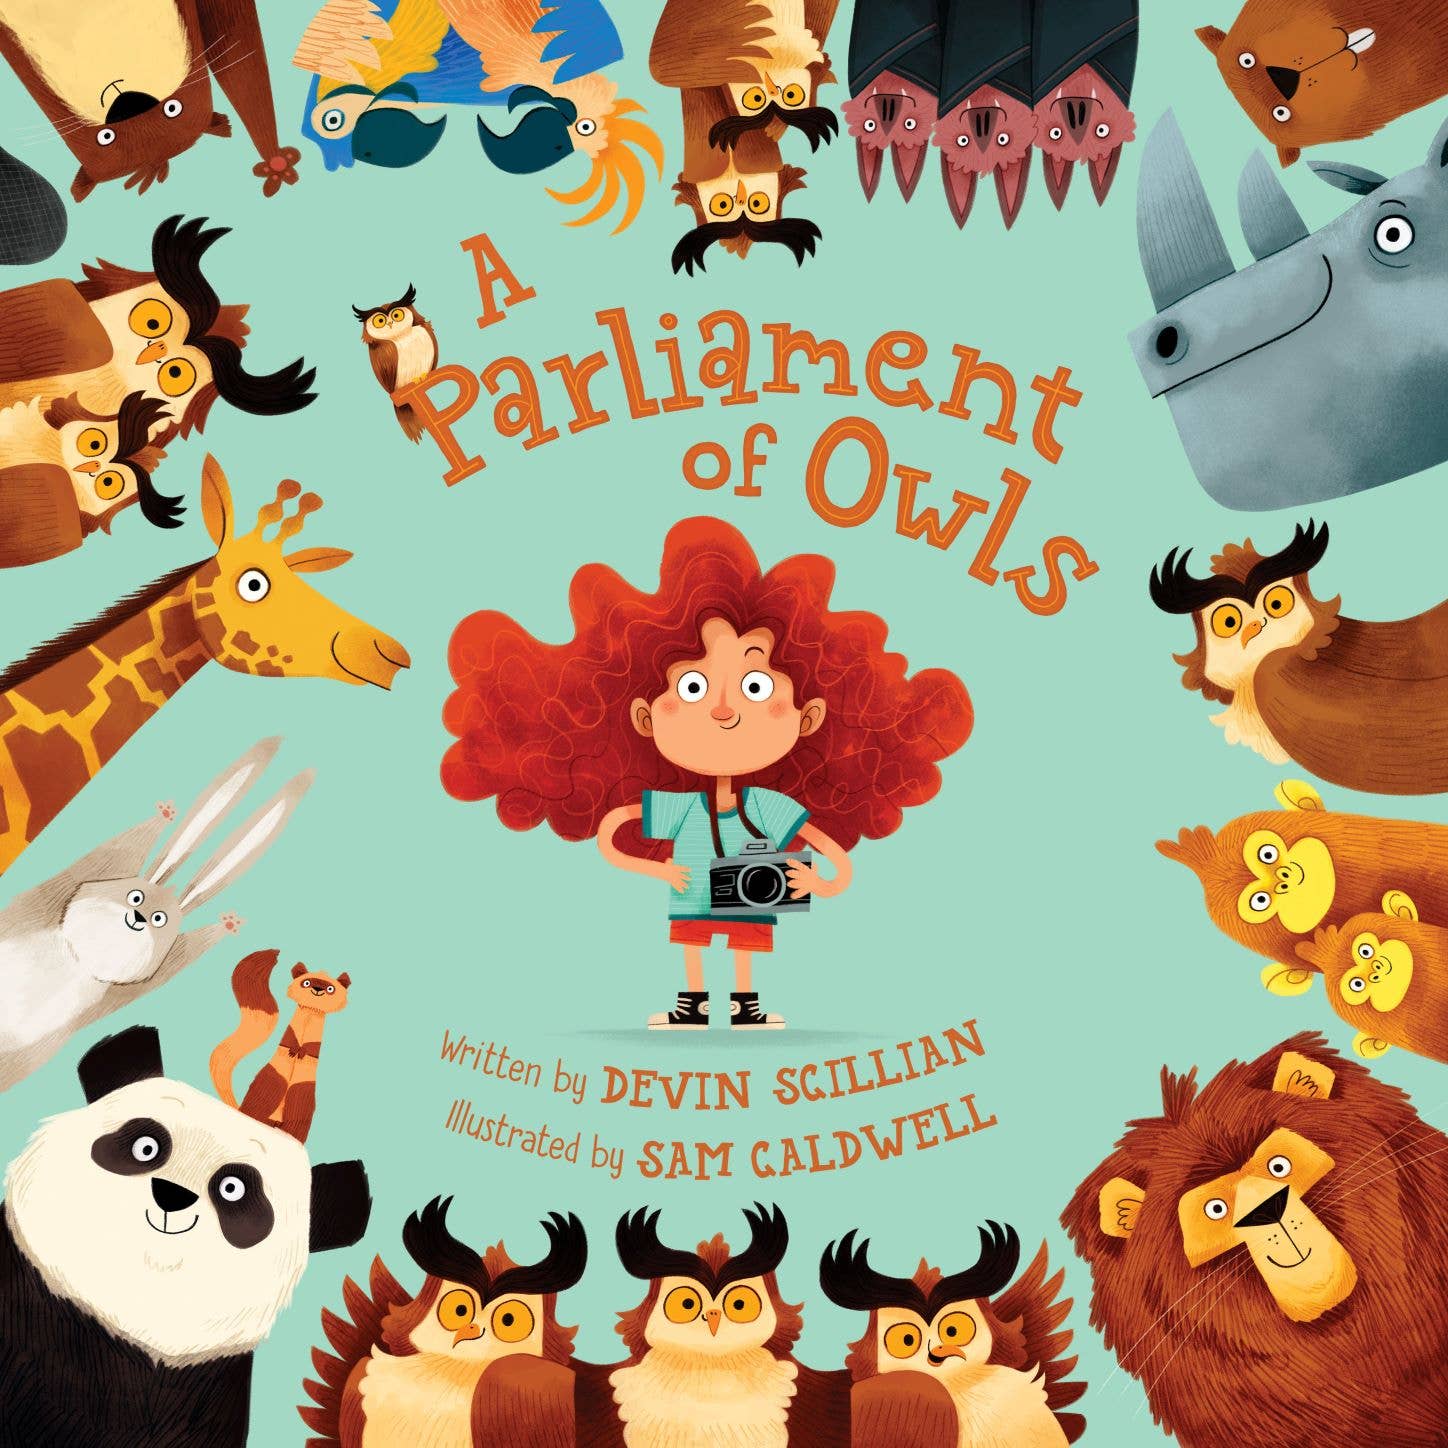 Sleeping Bear Press - A Parliament of Owls picture book